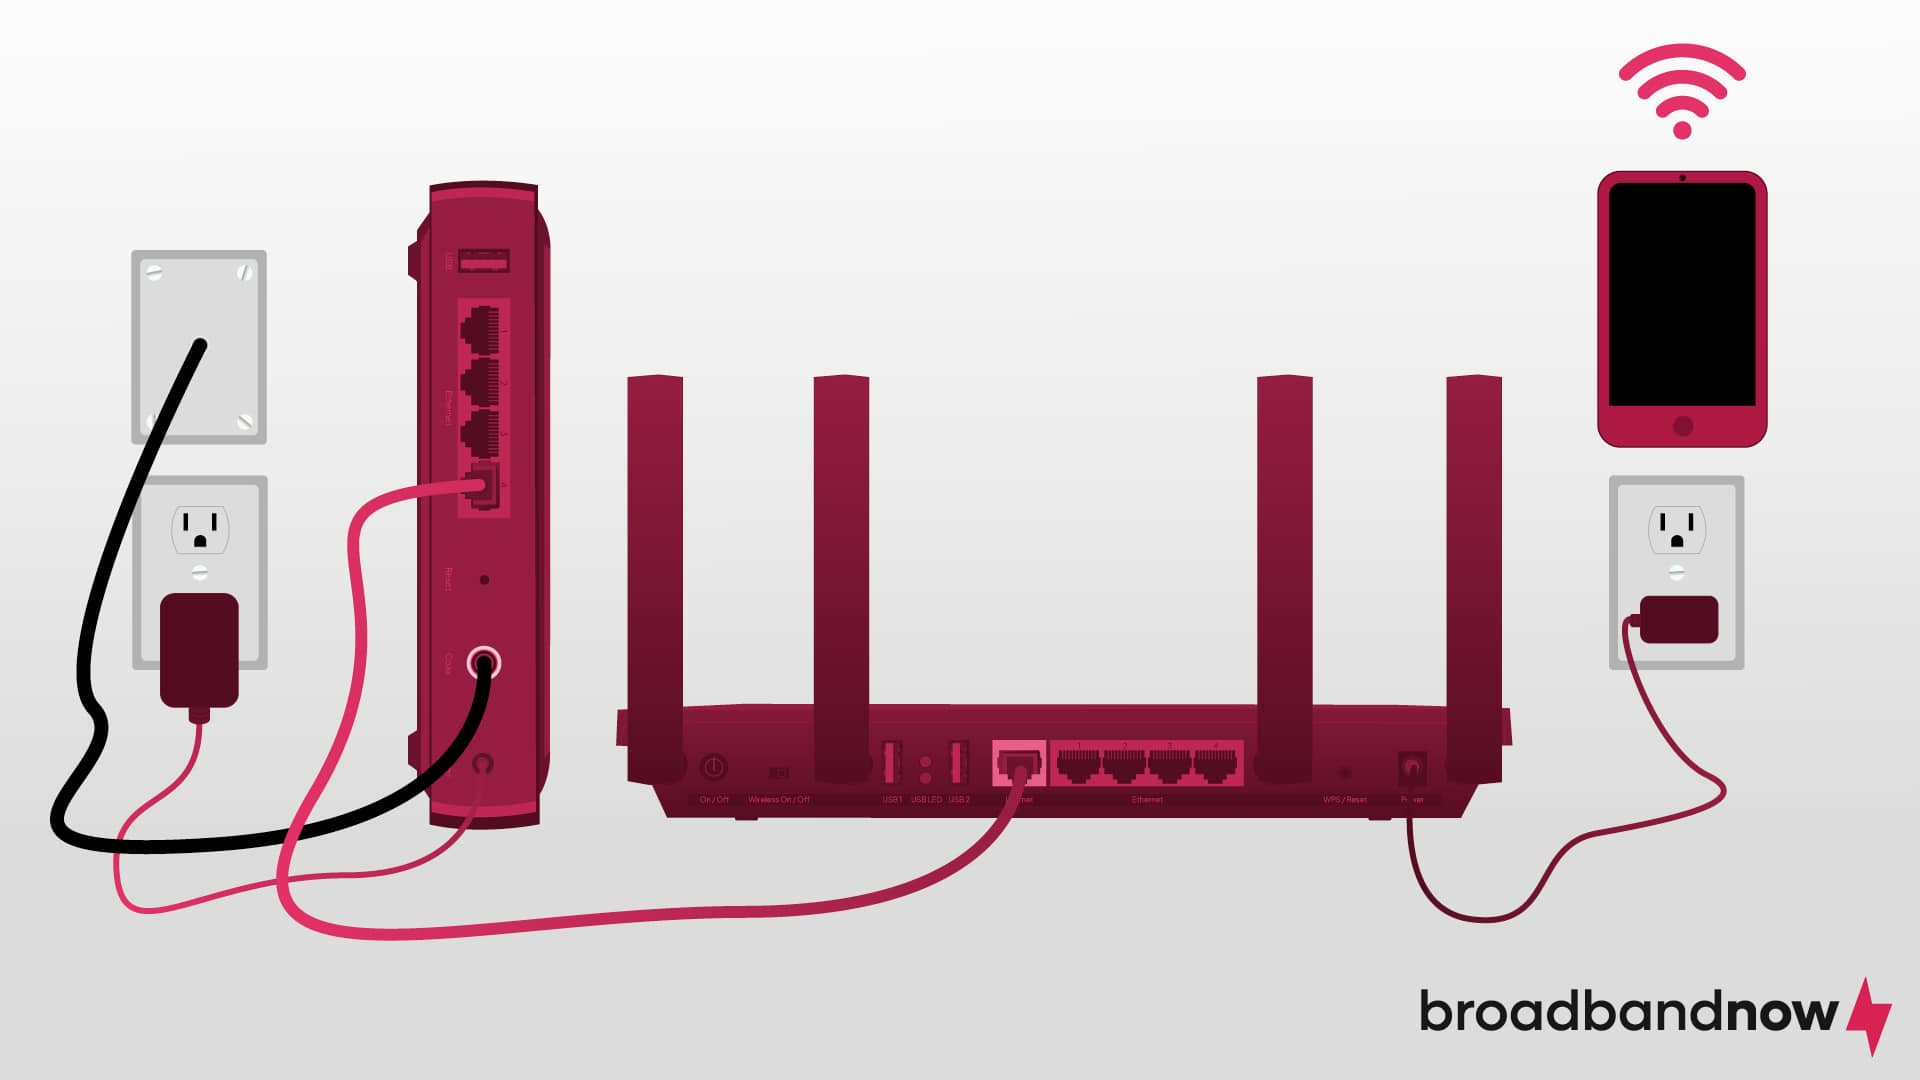 Graphic depicting a router and modem setup